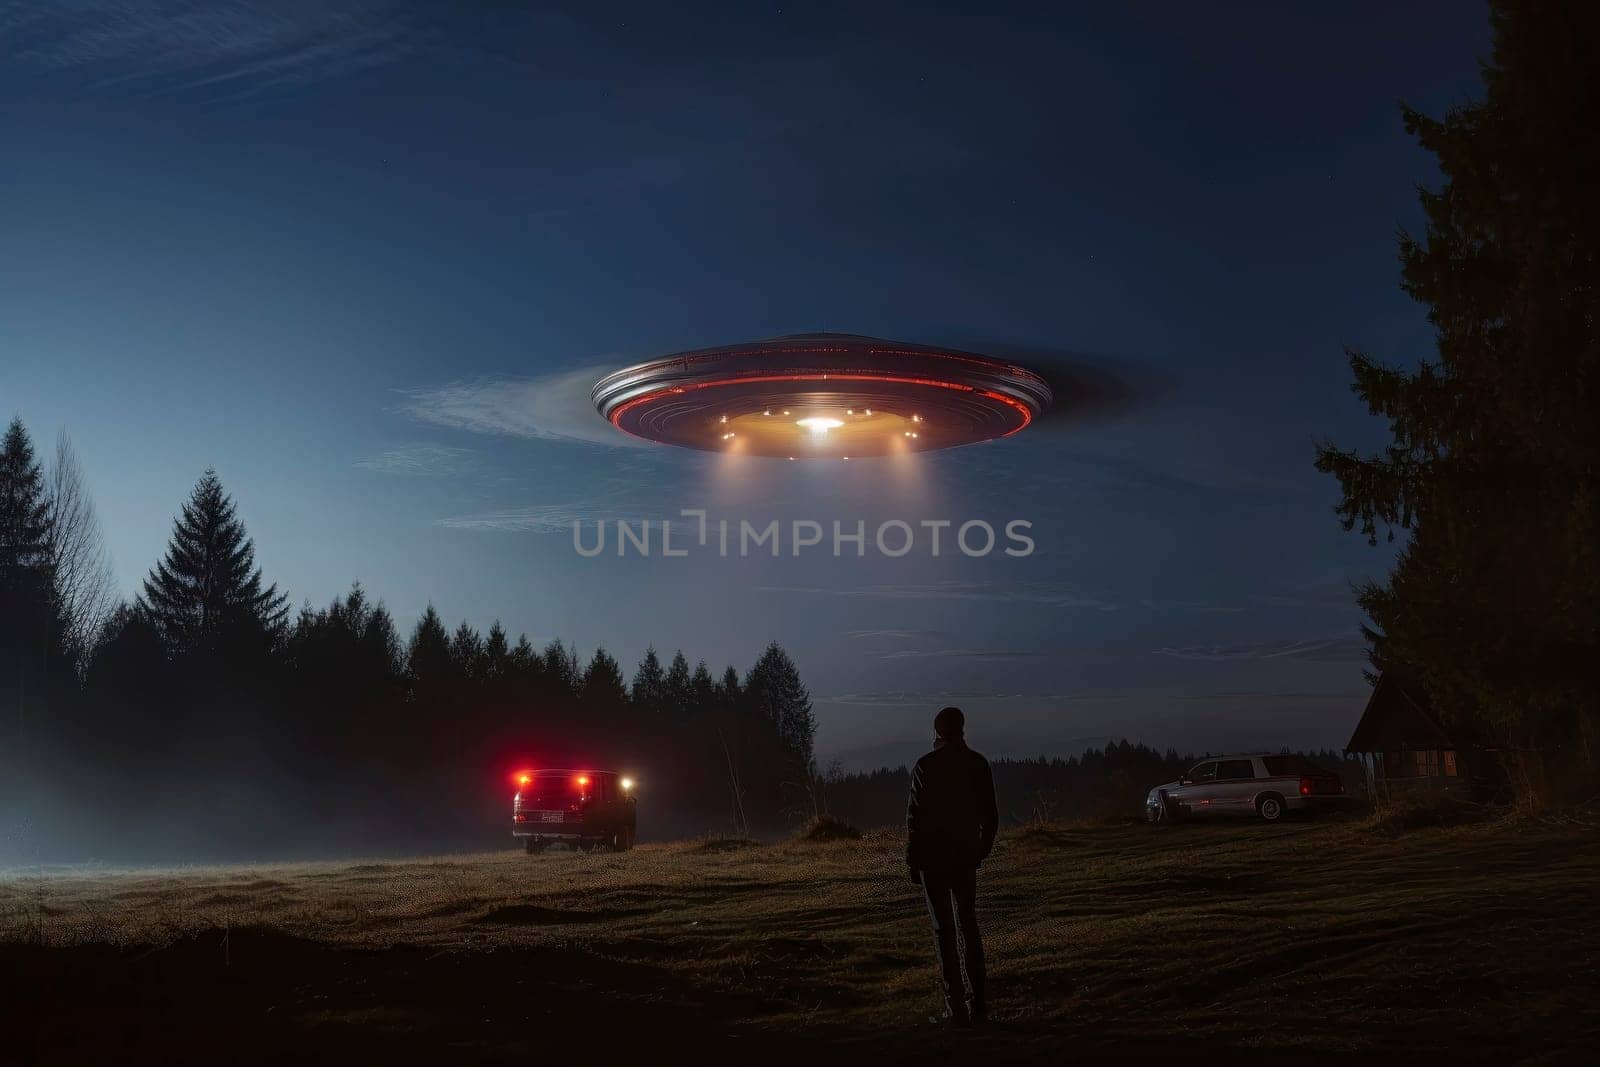 Image of a UFO in the night sky, depicting an alien abduction